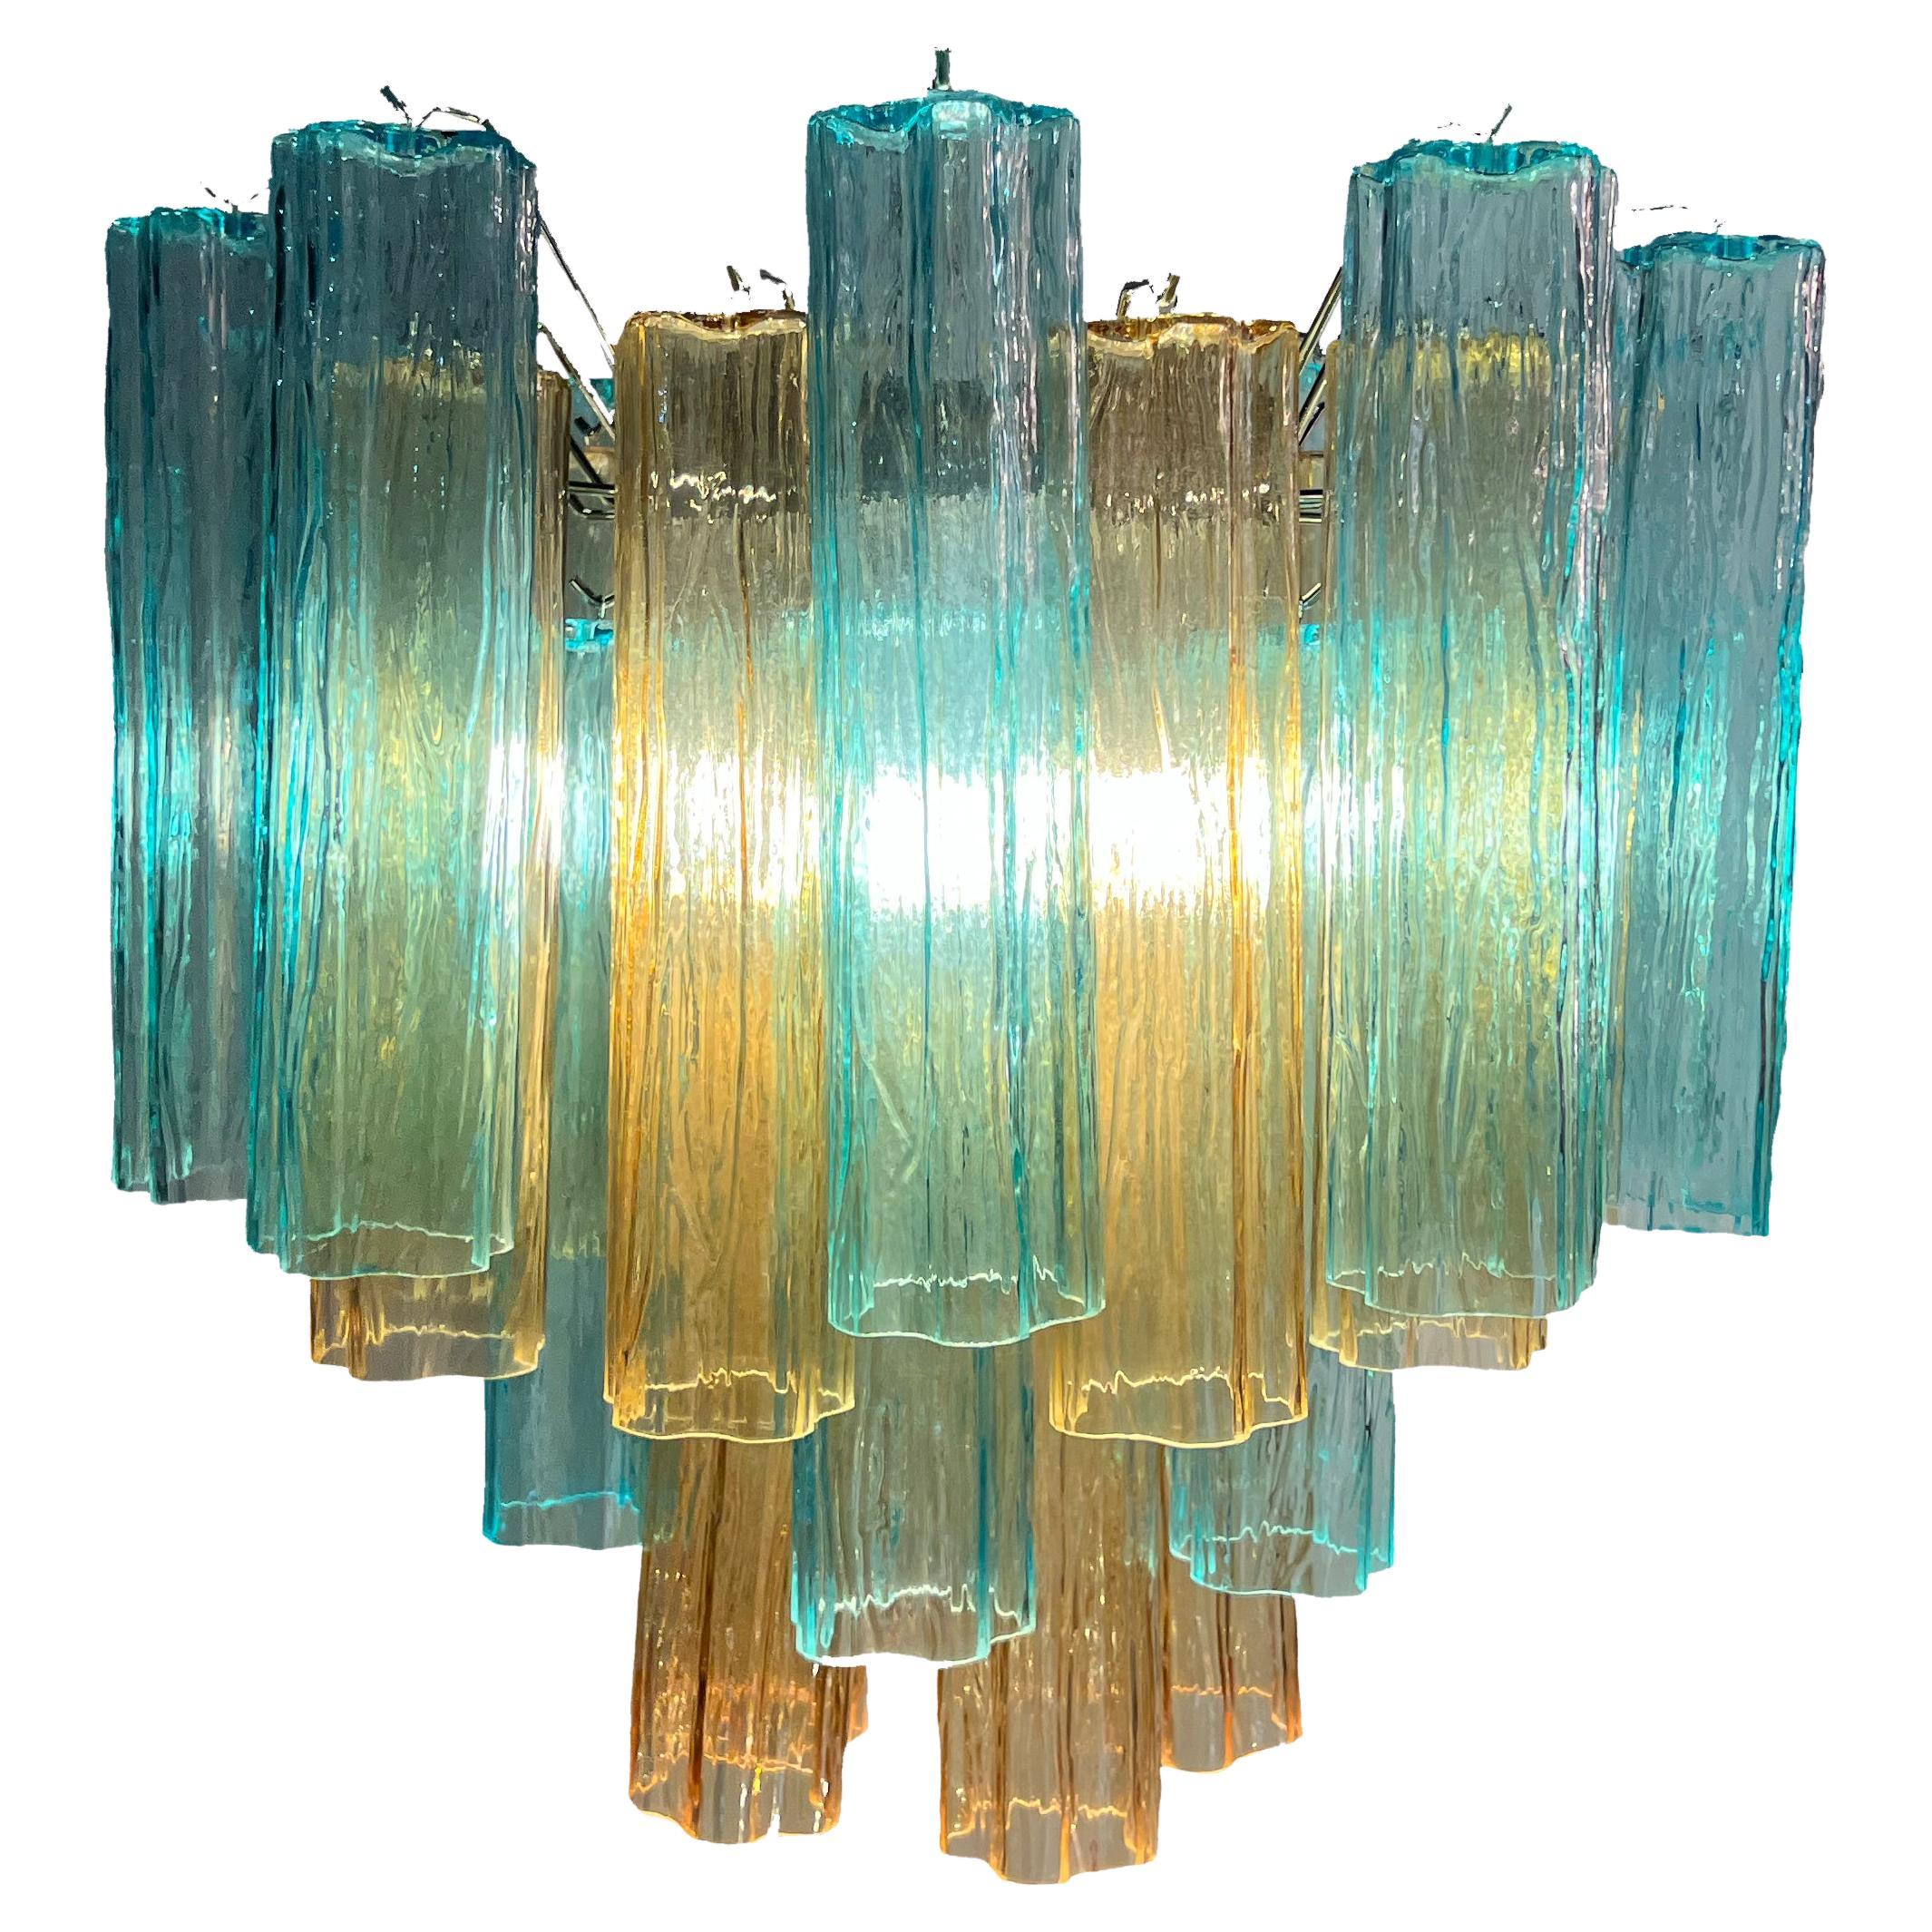 Fascinating Murano chandeliers. It is composed of 30 star-shaped panes of pure Murano glass. The height is adjustable according to the height of the ceiling. At no extra cost we will replace the original lamp holders with those in use in the USA.